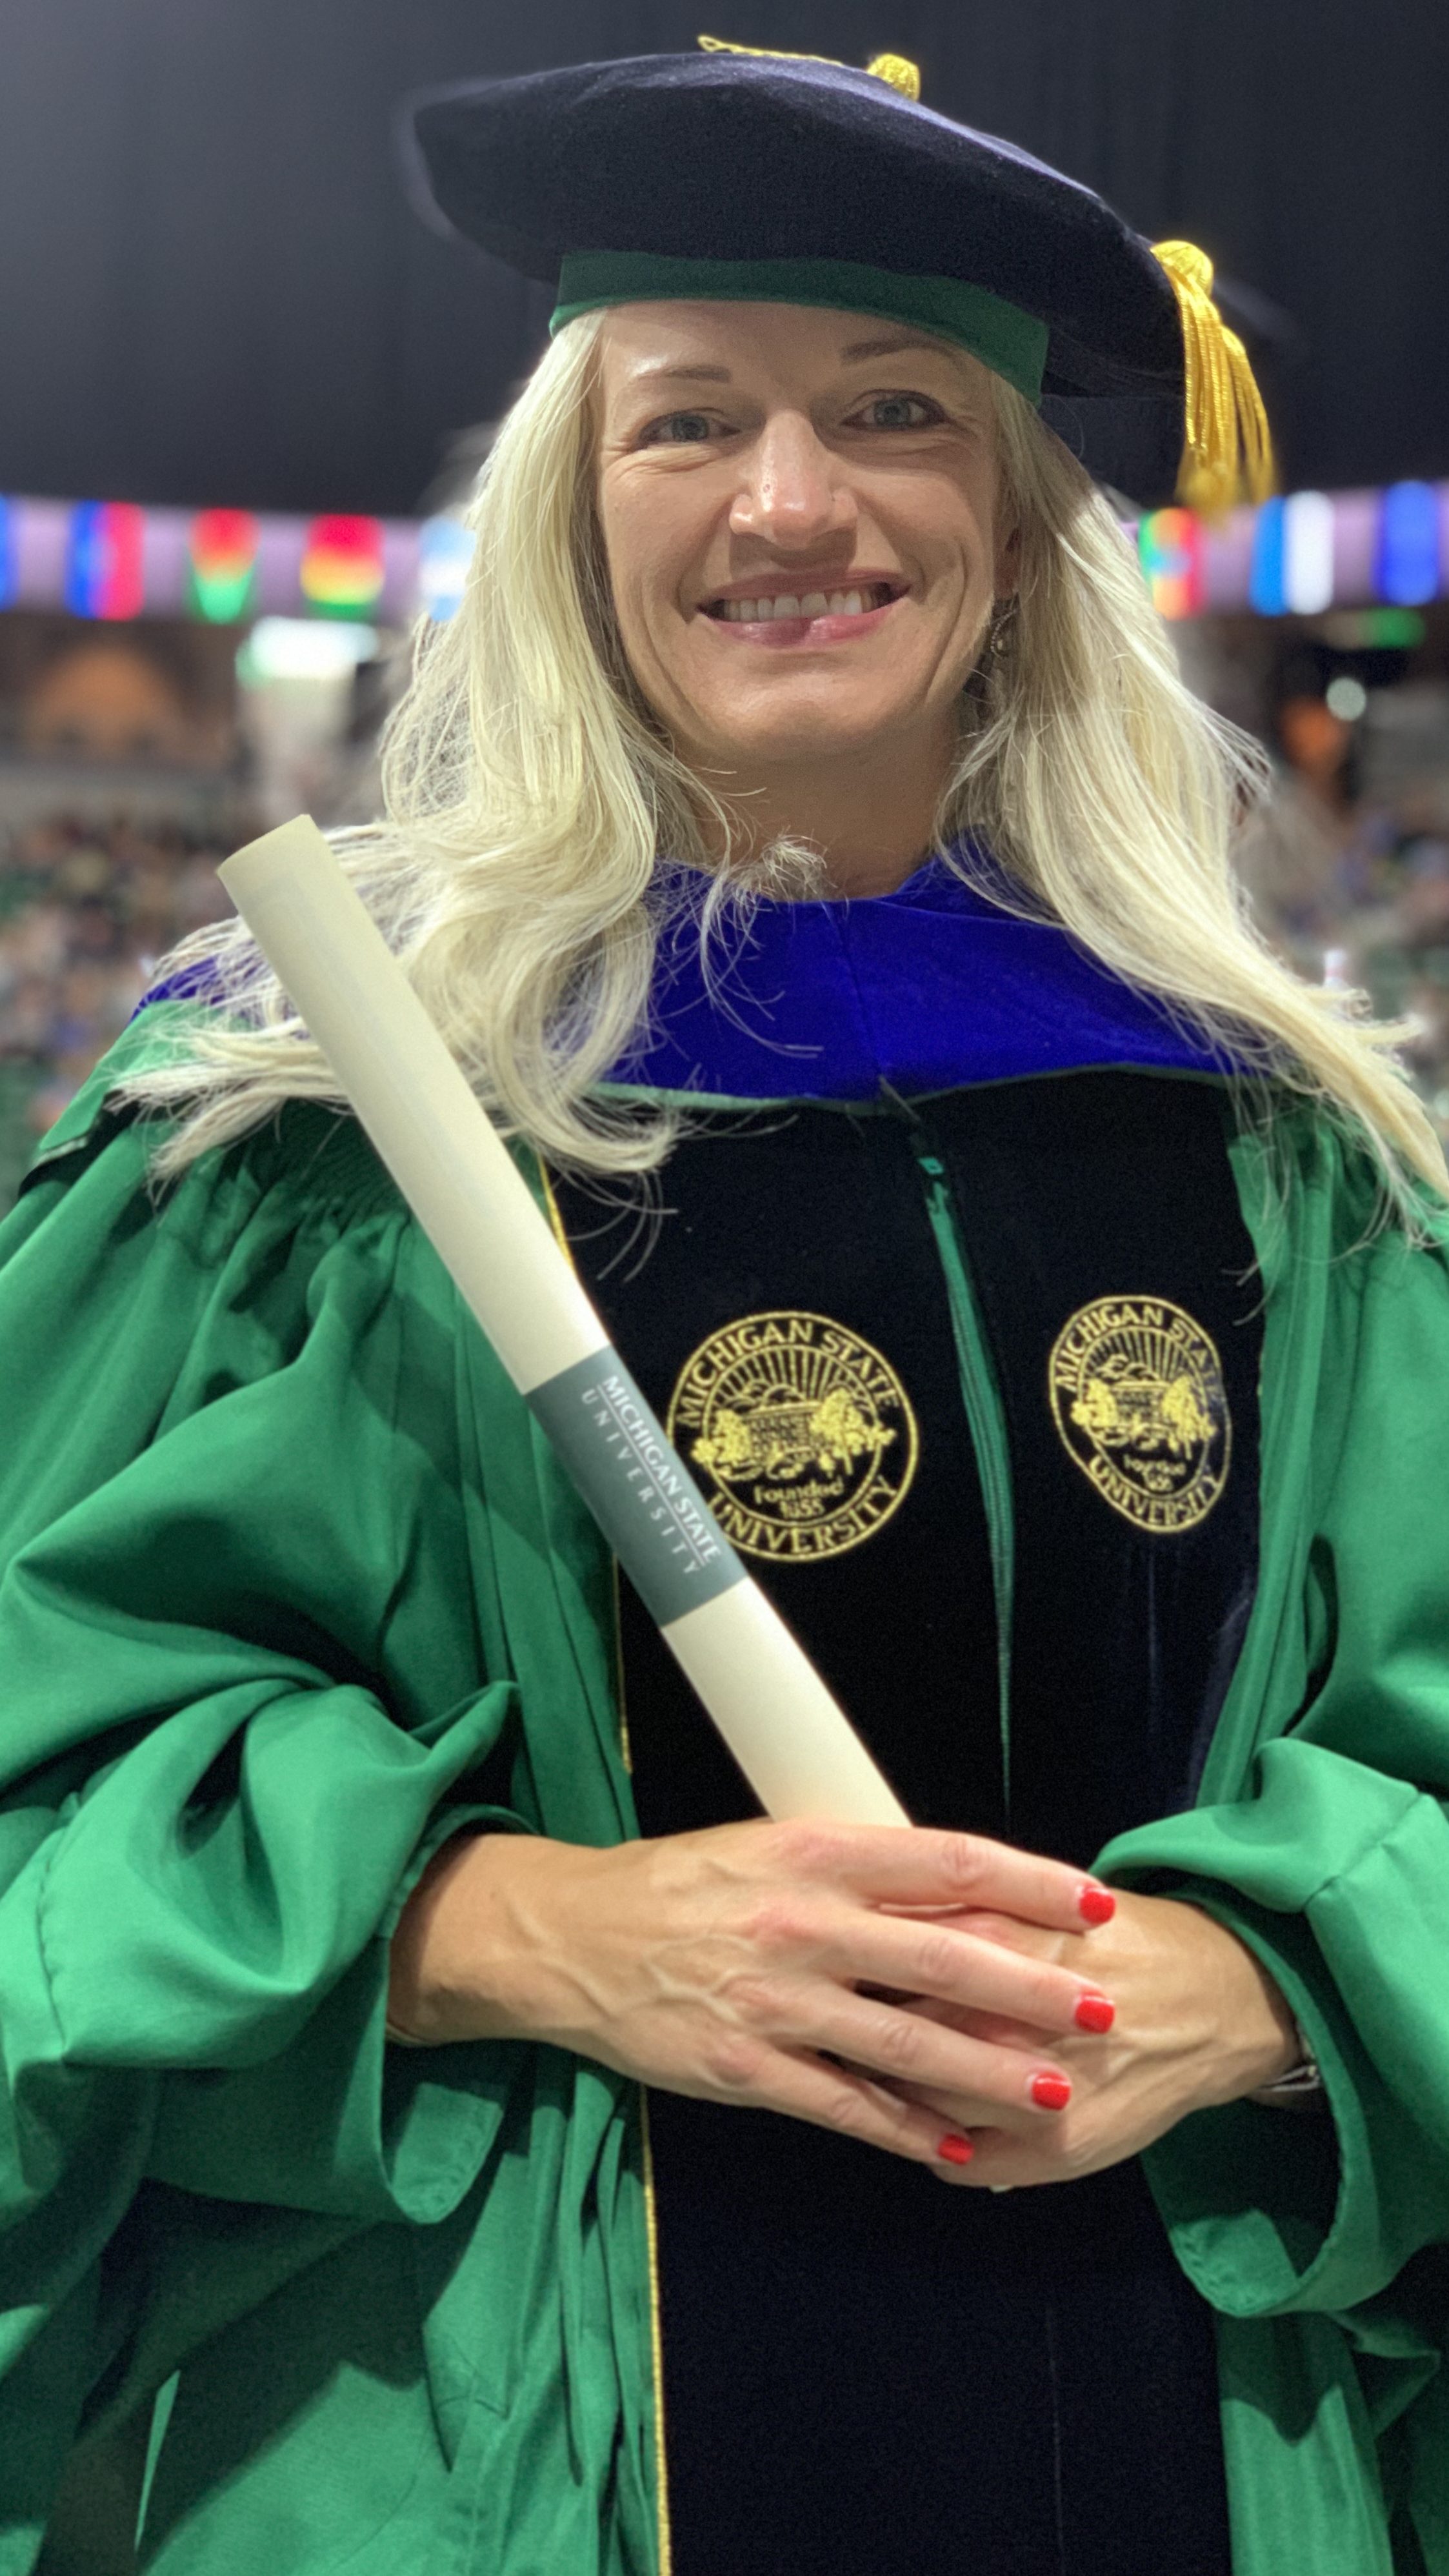 Heather receiving her PhD from Michigan State University. 2019